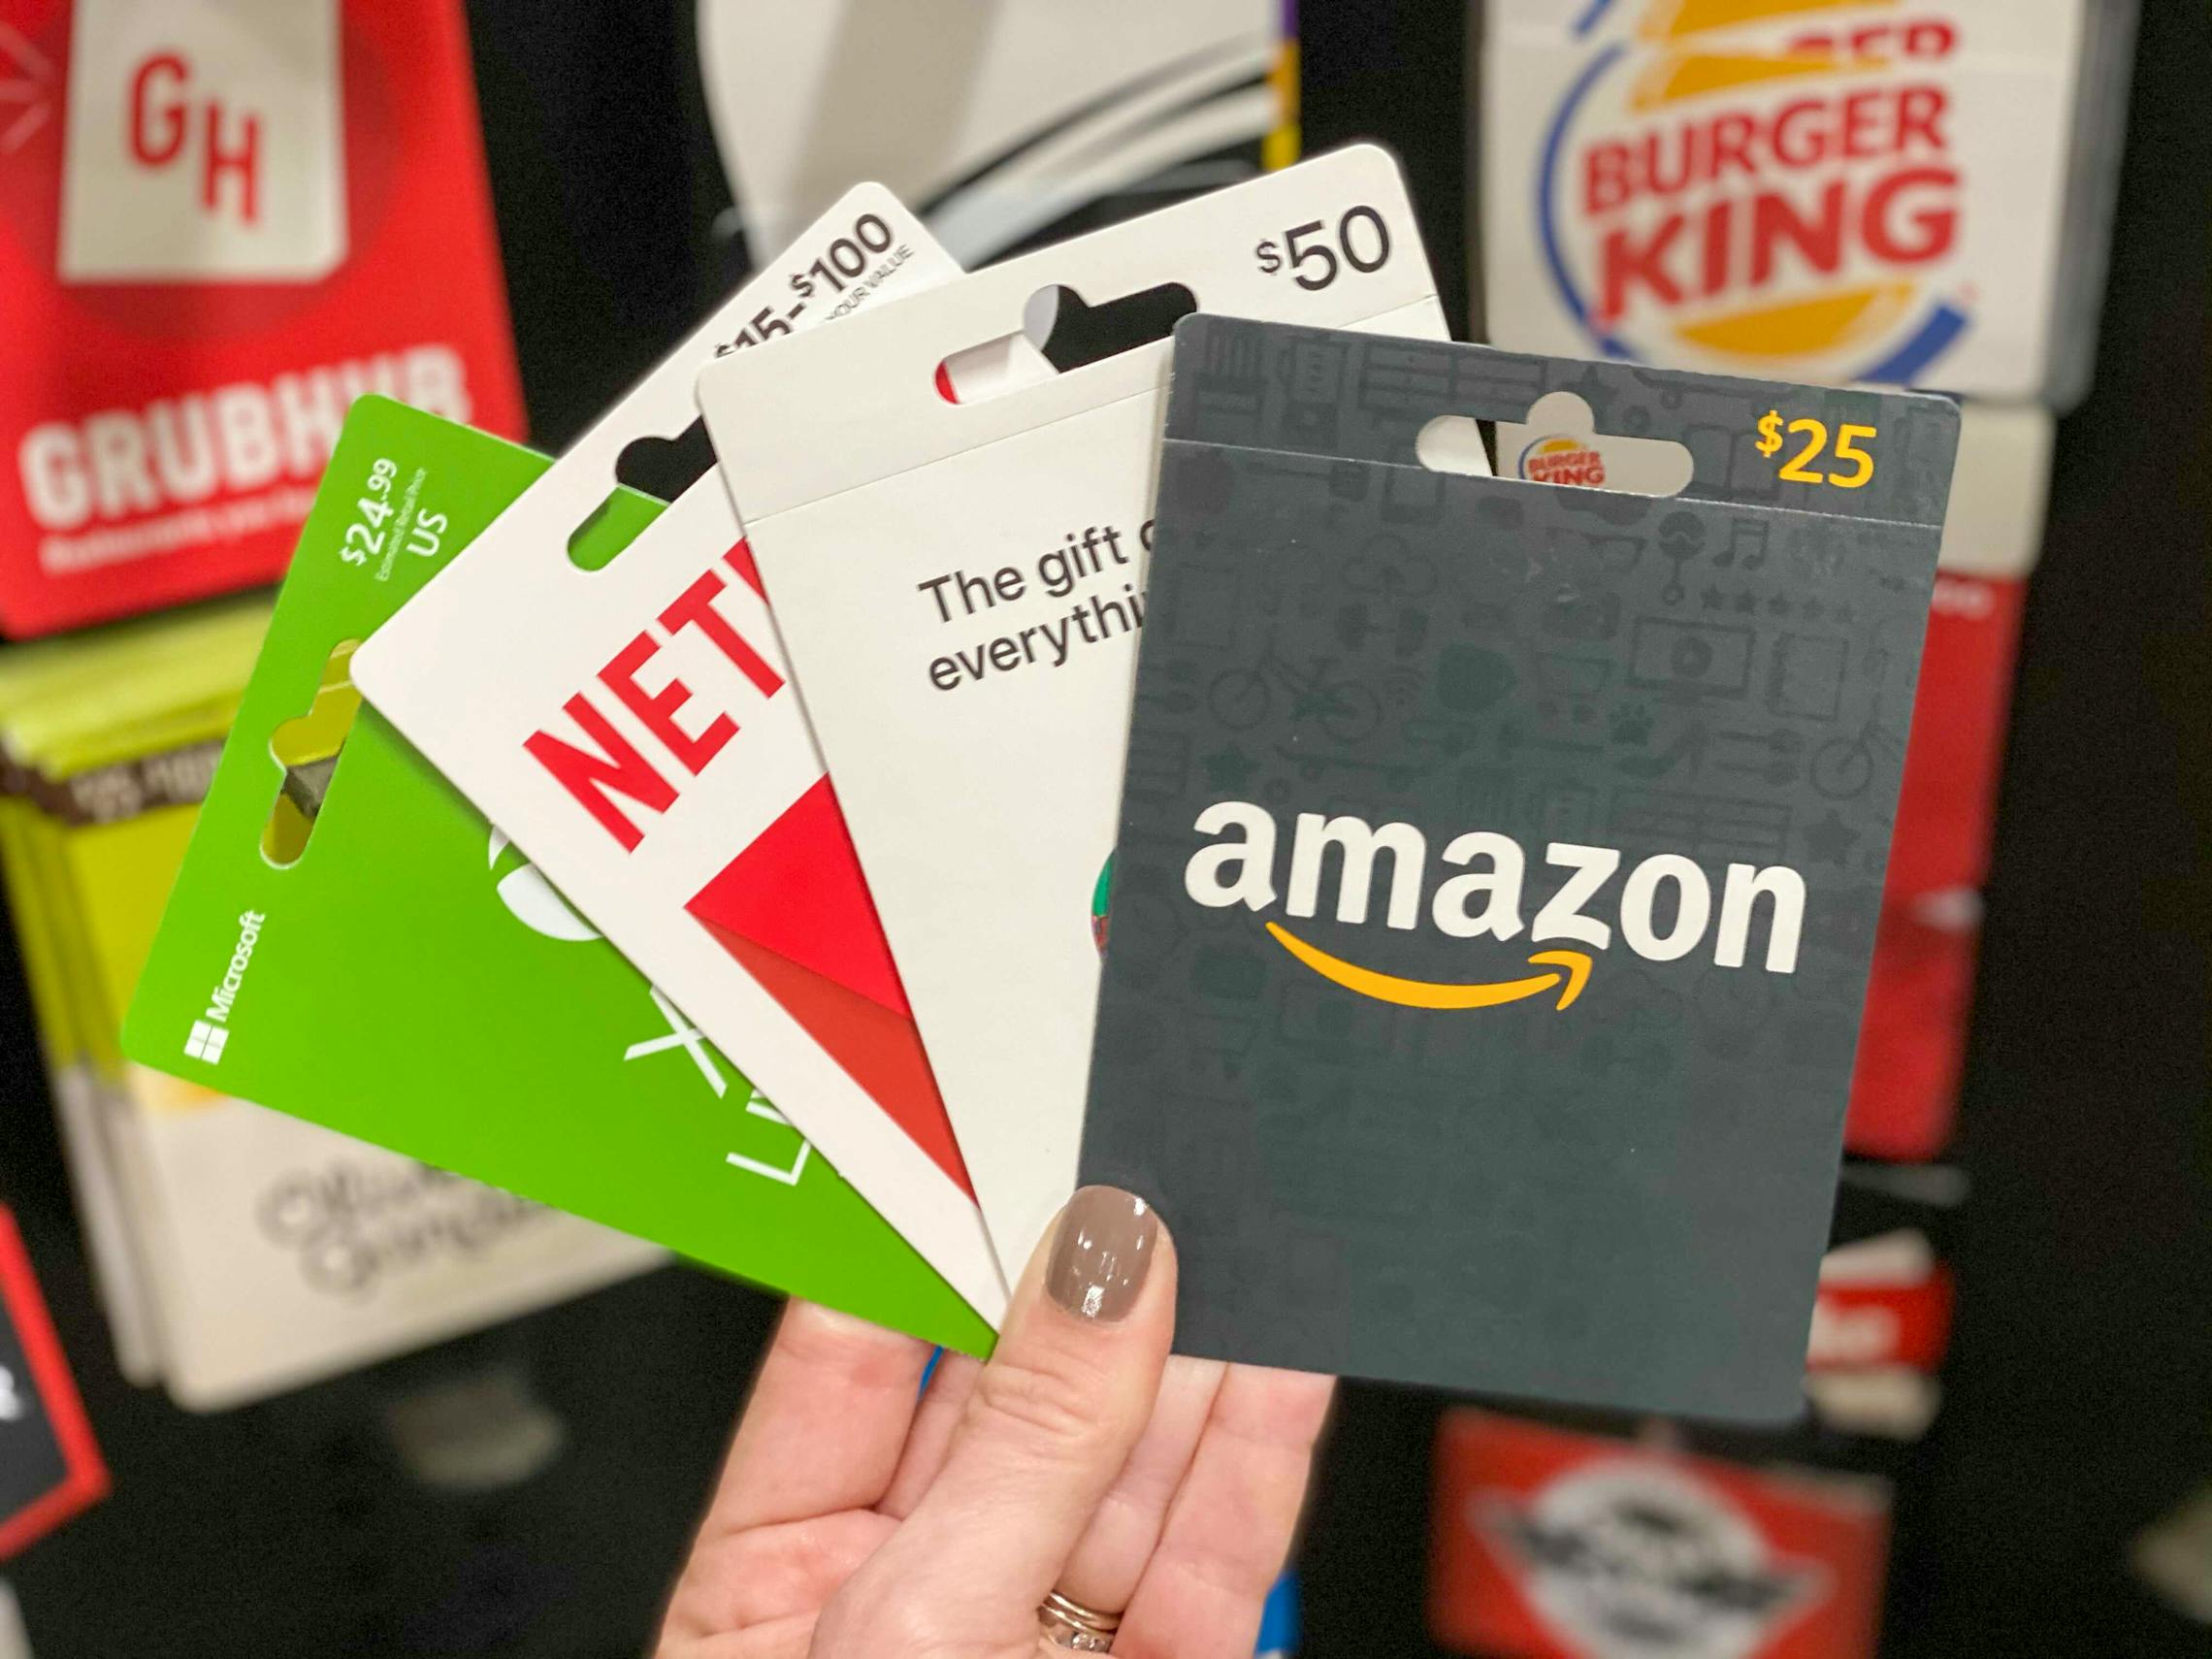 Gift cards held in front of the gift card display at Dollar general